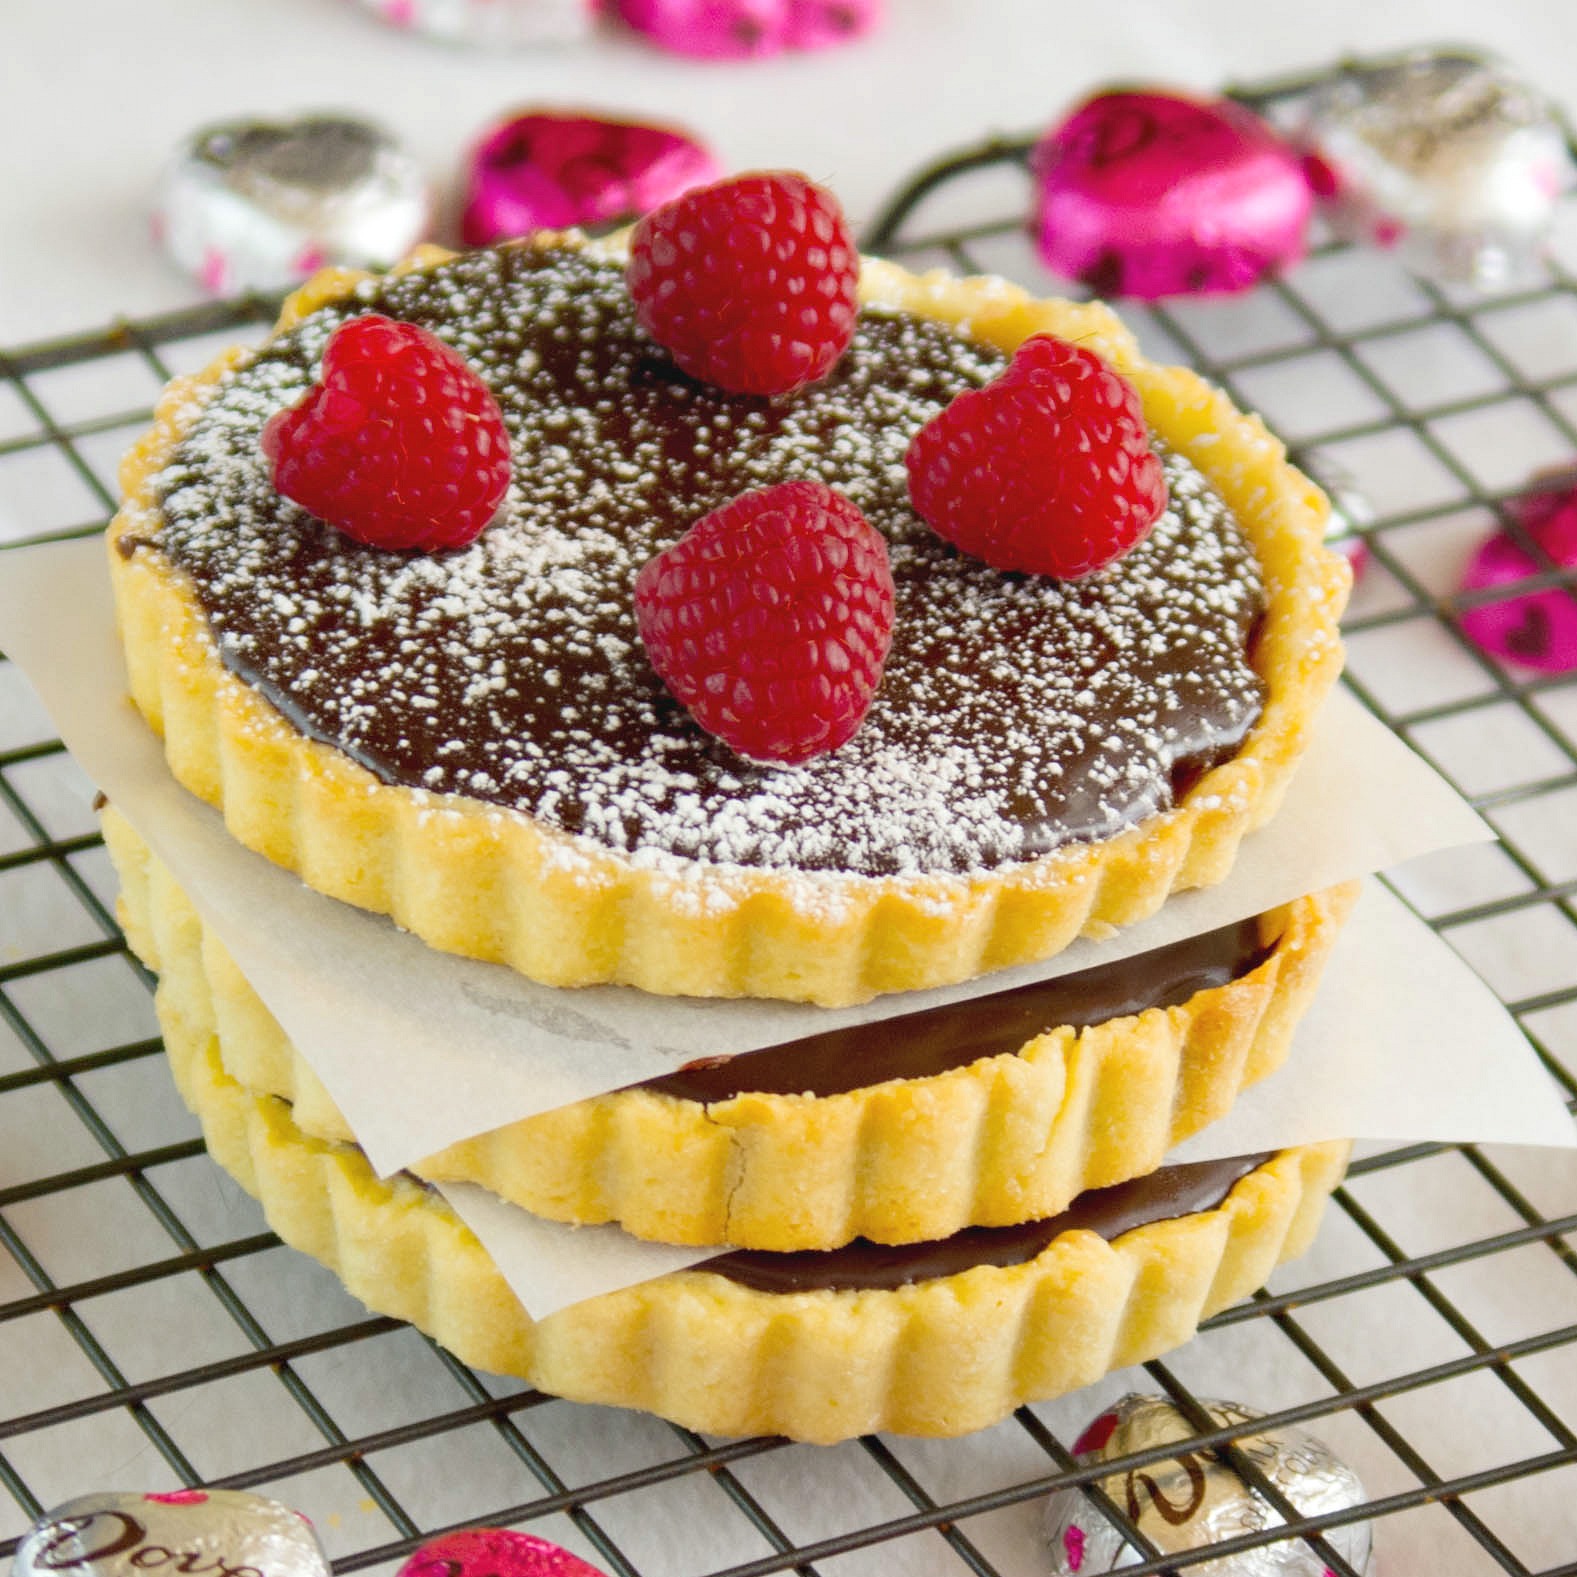 If you want to impress your significant other, make this Chocolate Raspberry Tart. The ultimate Valentine's Day dessert!| http://dadwhats4dinner.com